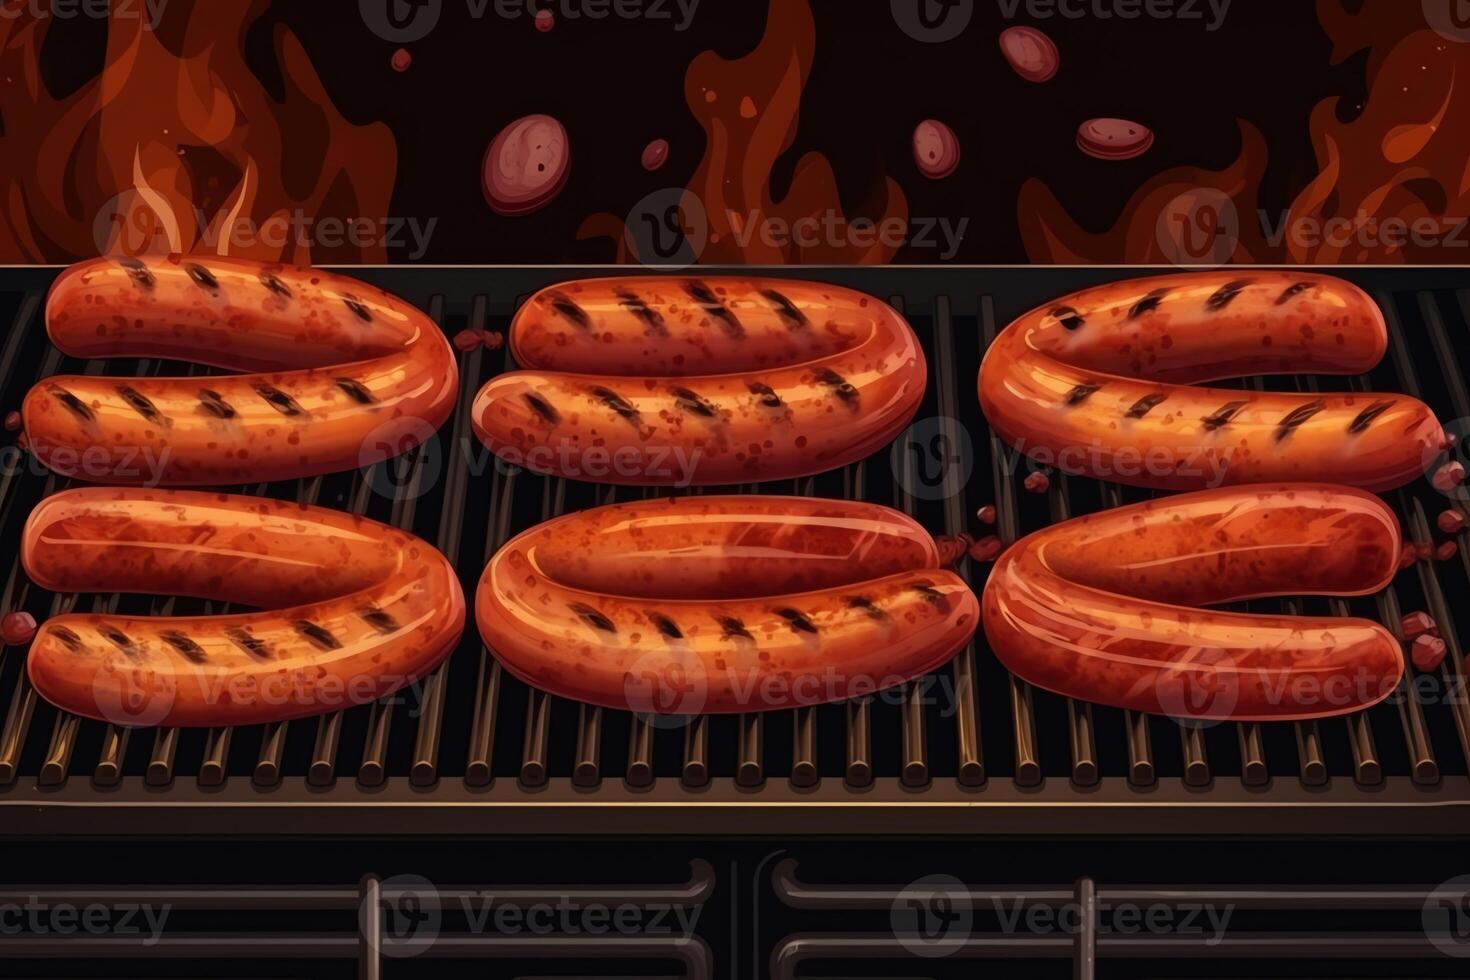 Sausages on a grill grilled sausage on the flame grill illustration. photo